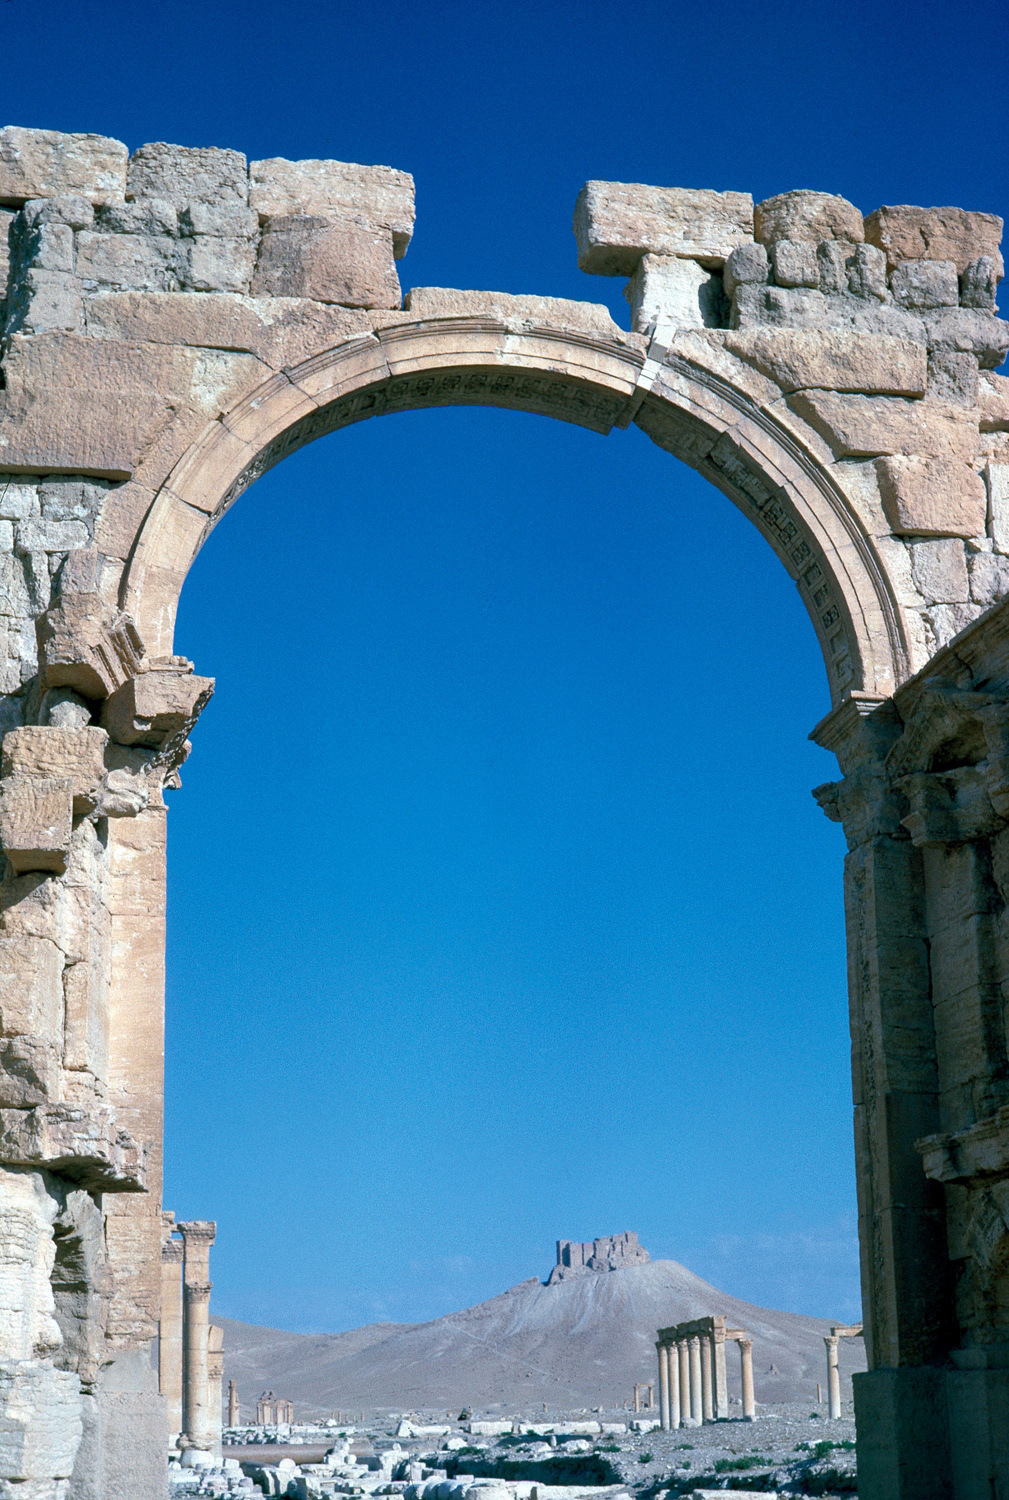 Detail of an arch of the Great Colonnade, with the Qala seen in the distance through the arch. The arch was reported destroyed in October 2015.